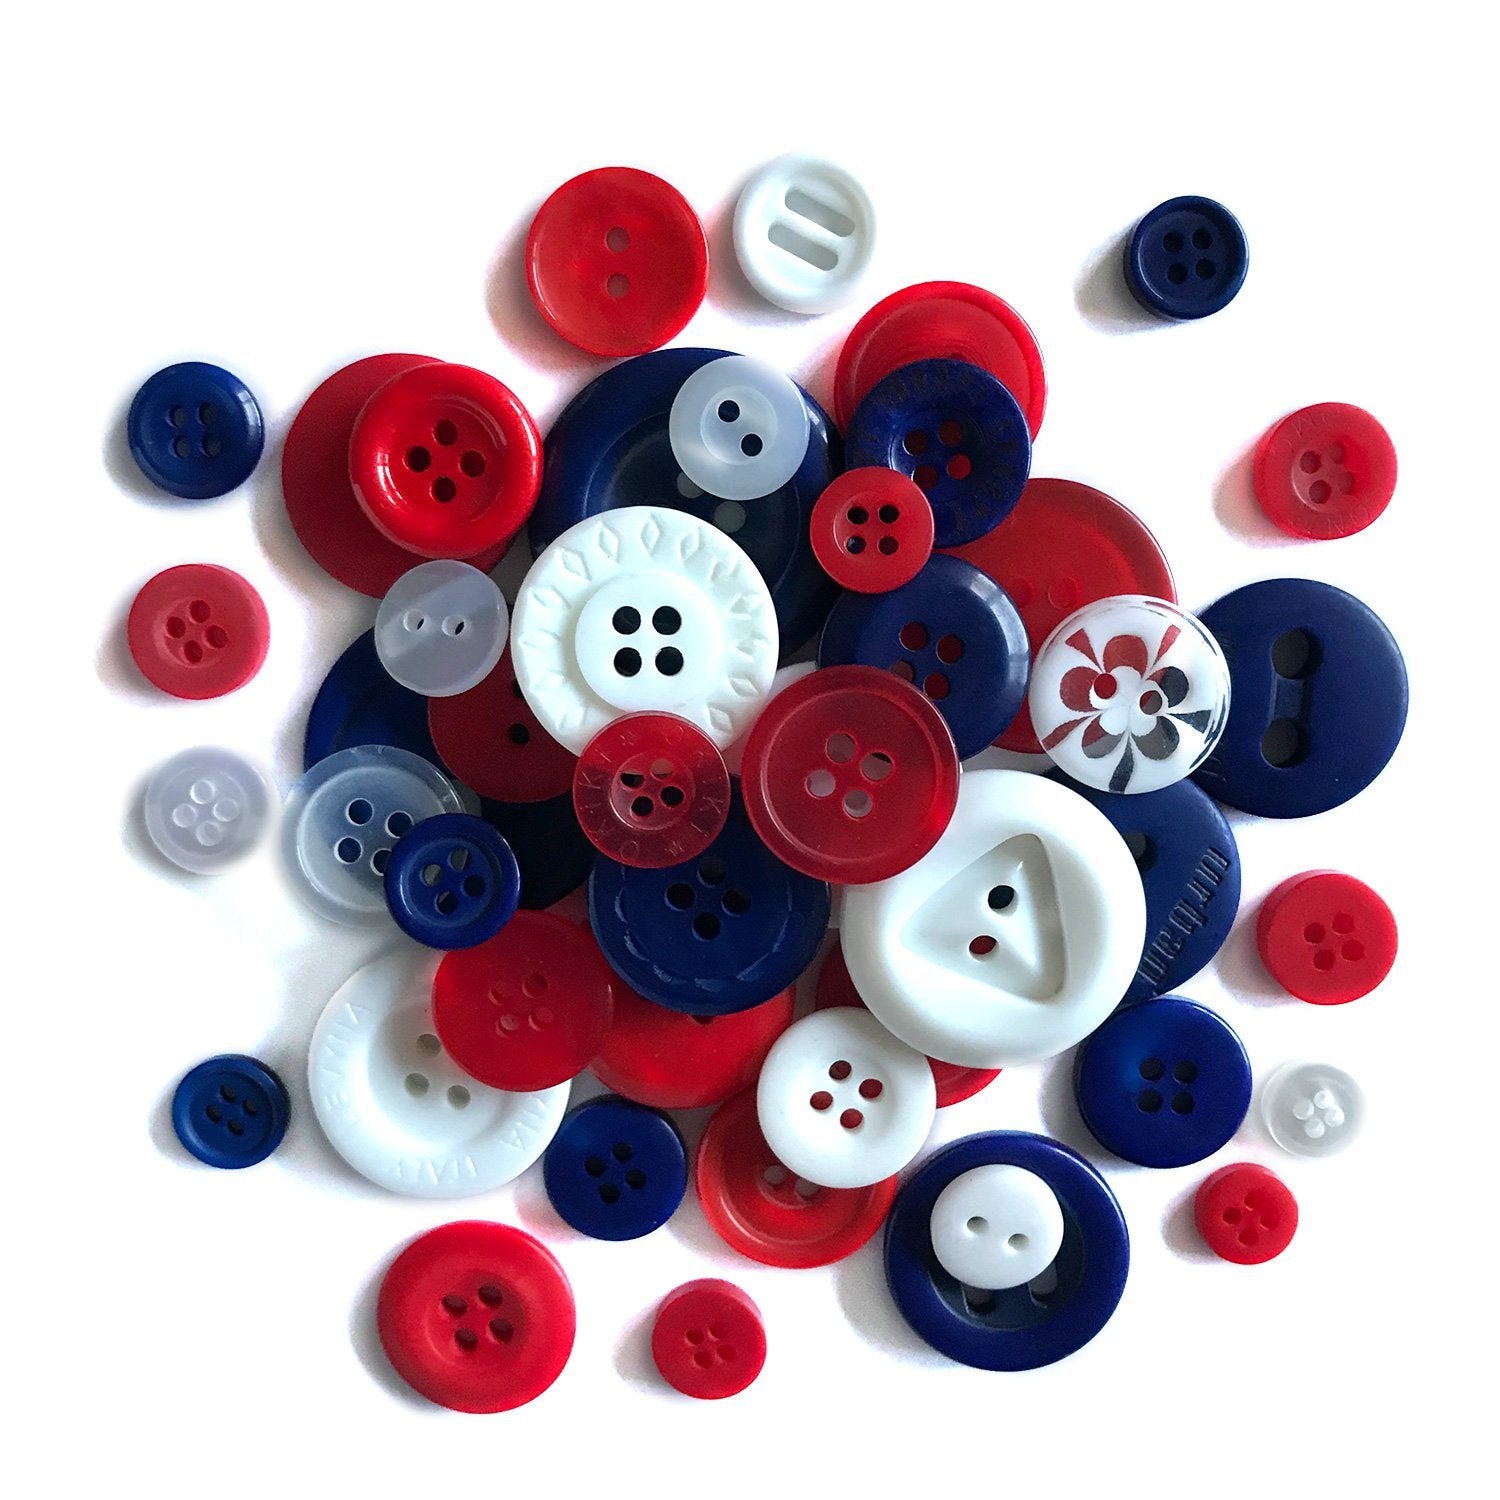 Red & Blue Gems & Jewels for Crafts & Jewelry Making, Buttons Galore